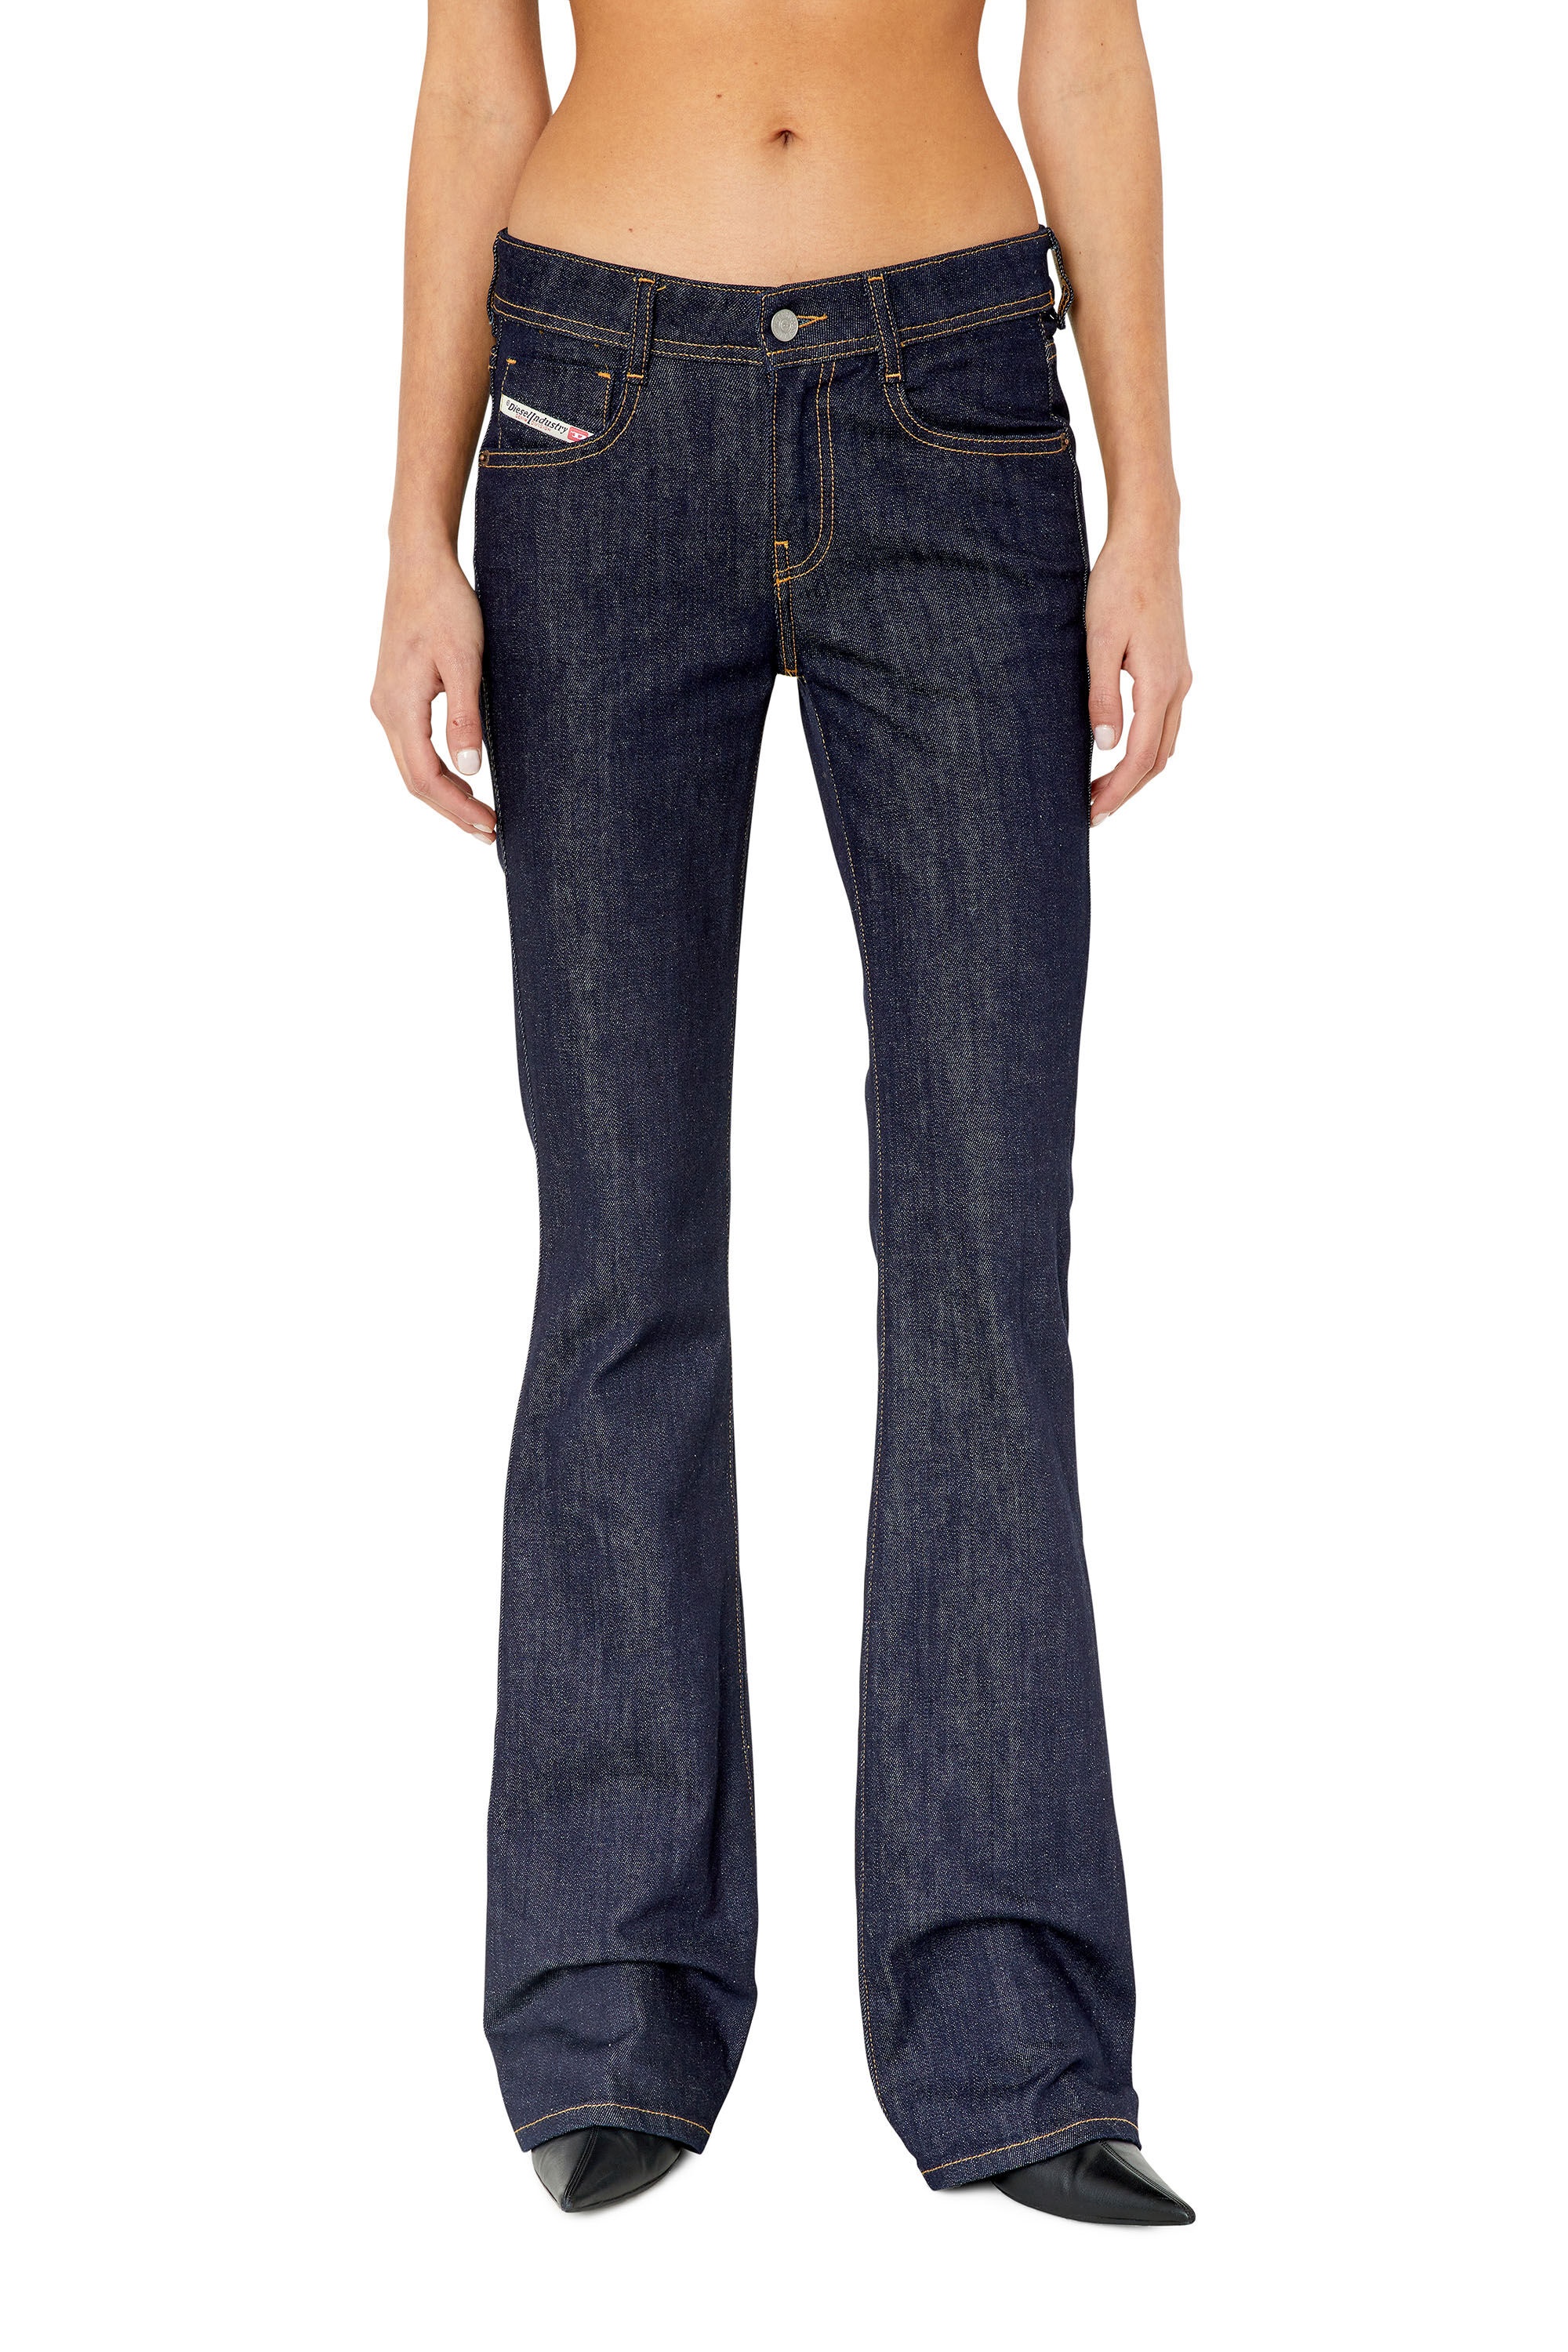 BOOTCUT AND FLARE JEANS 1969 D-EBBEY Z9B89 - 3